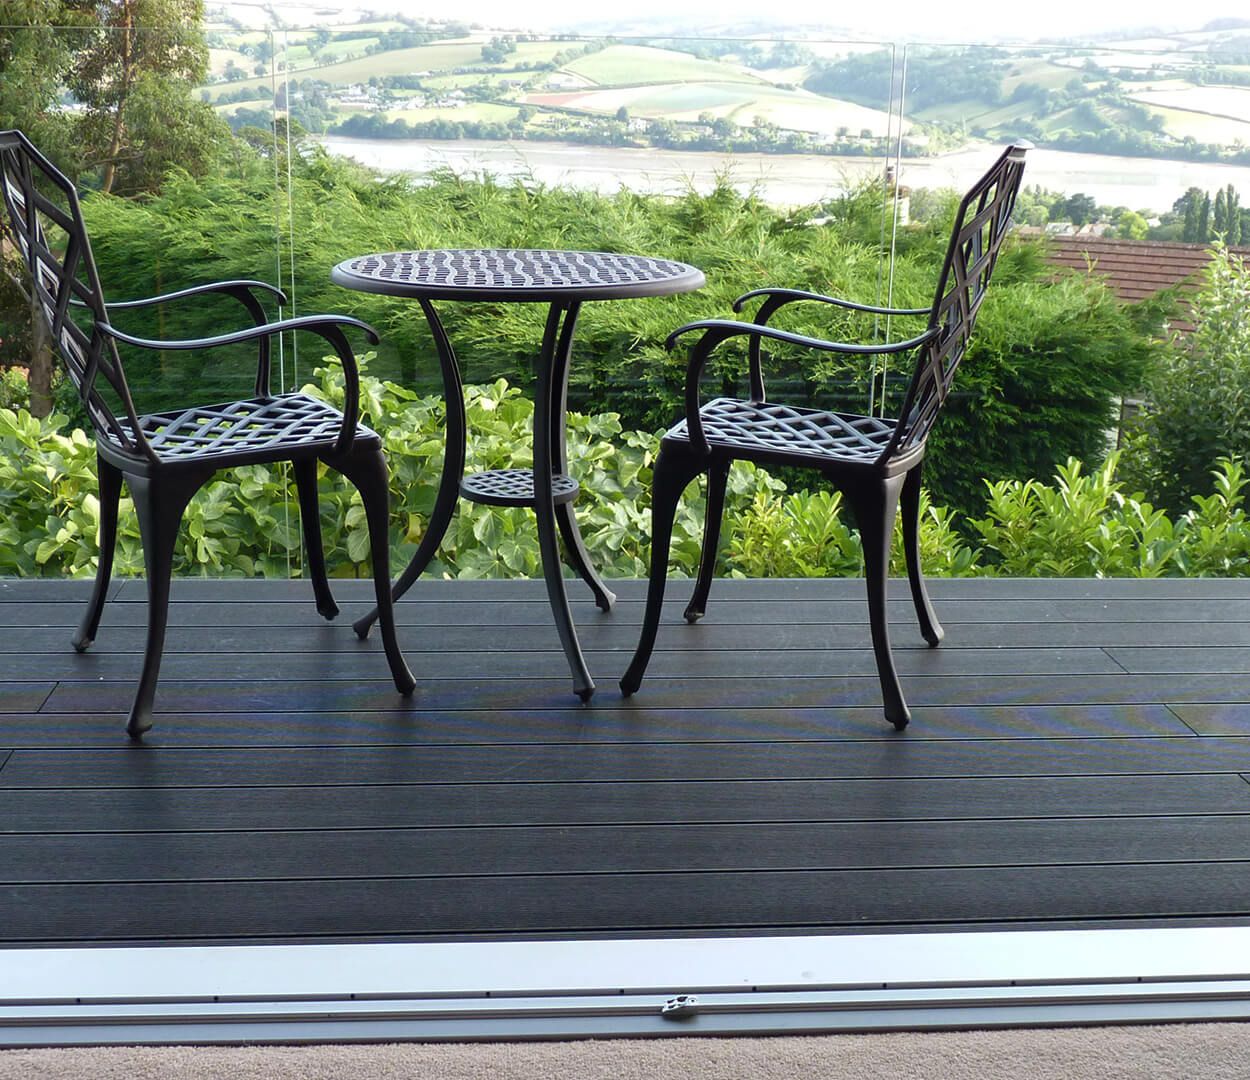 Balcony area fitted with Cladco Composite Decking